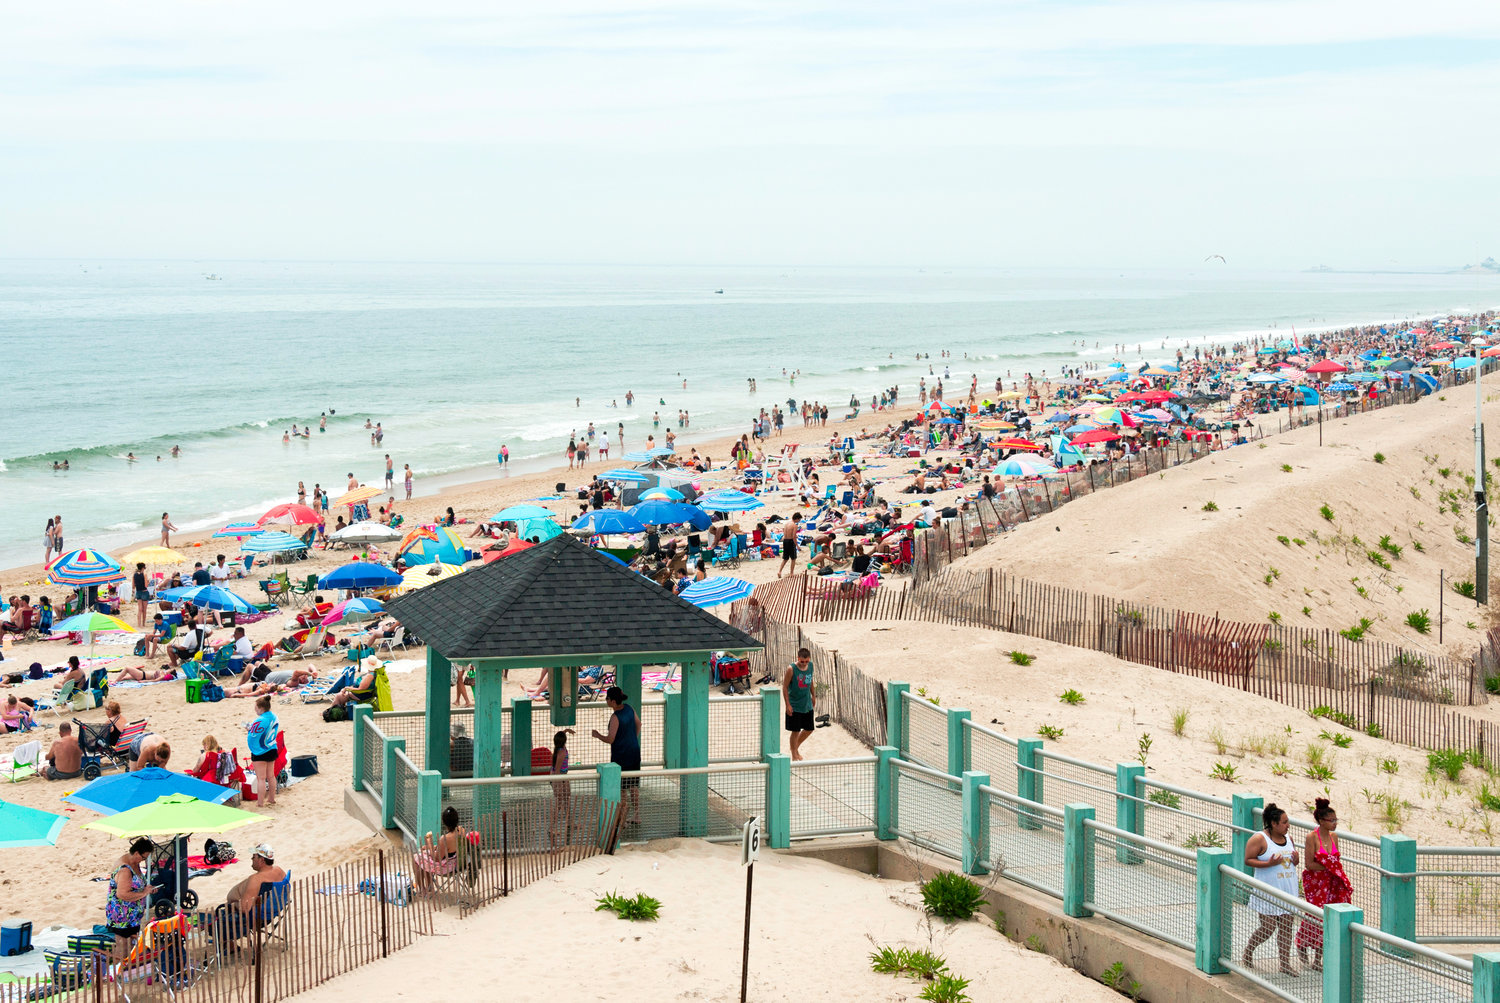 Misquamicut State Beach is a family-friendly spot for seaside fun